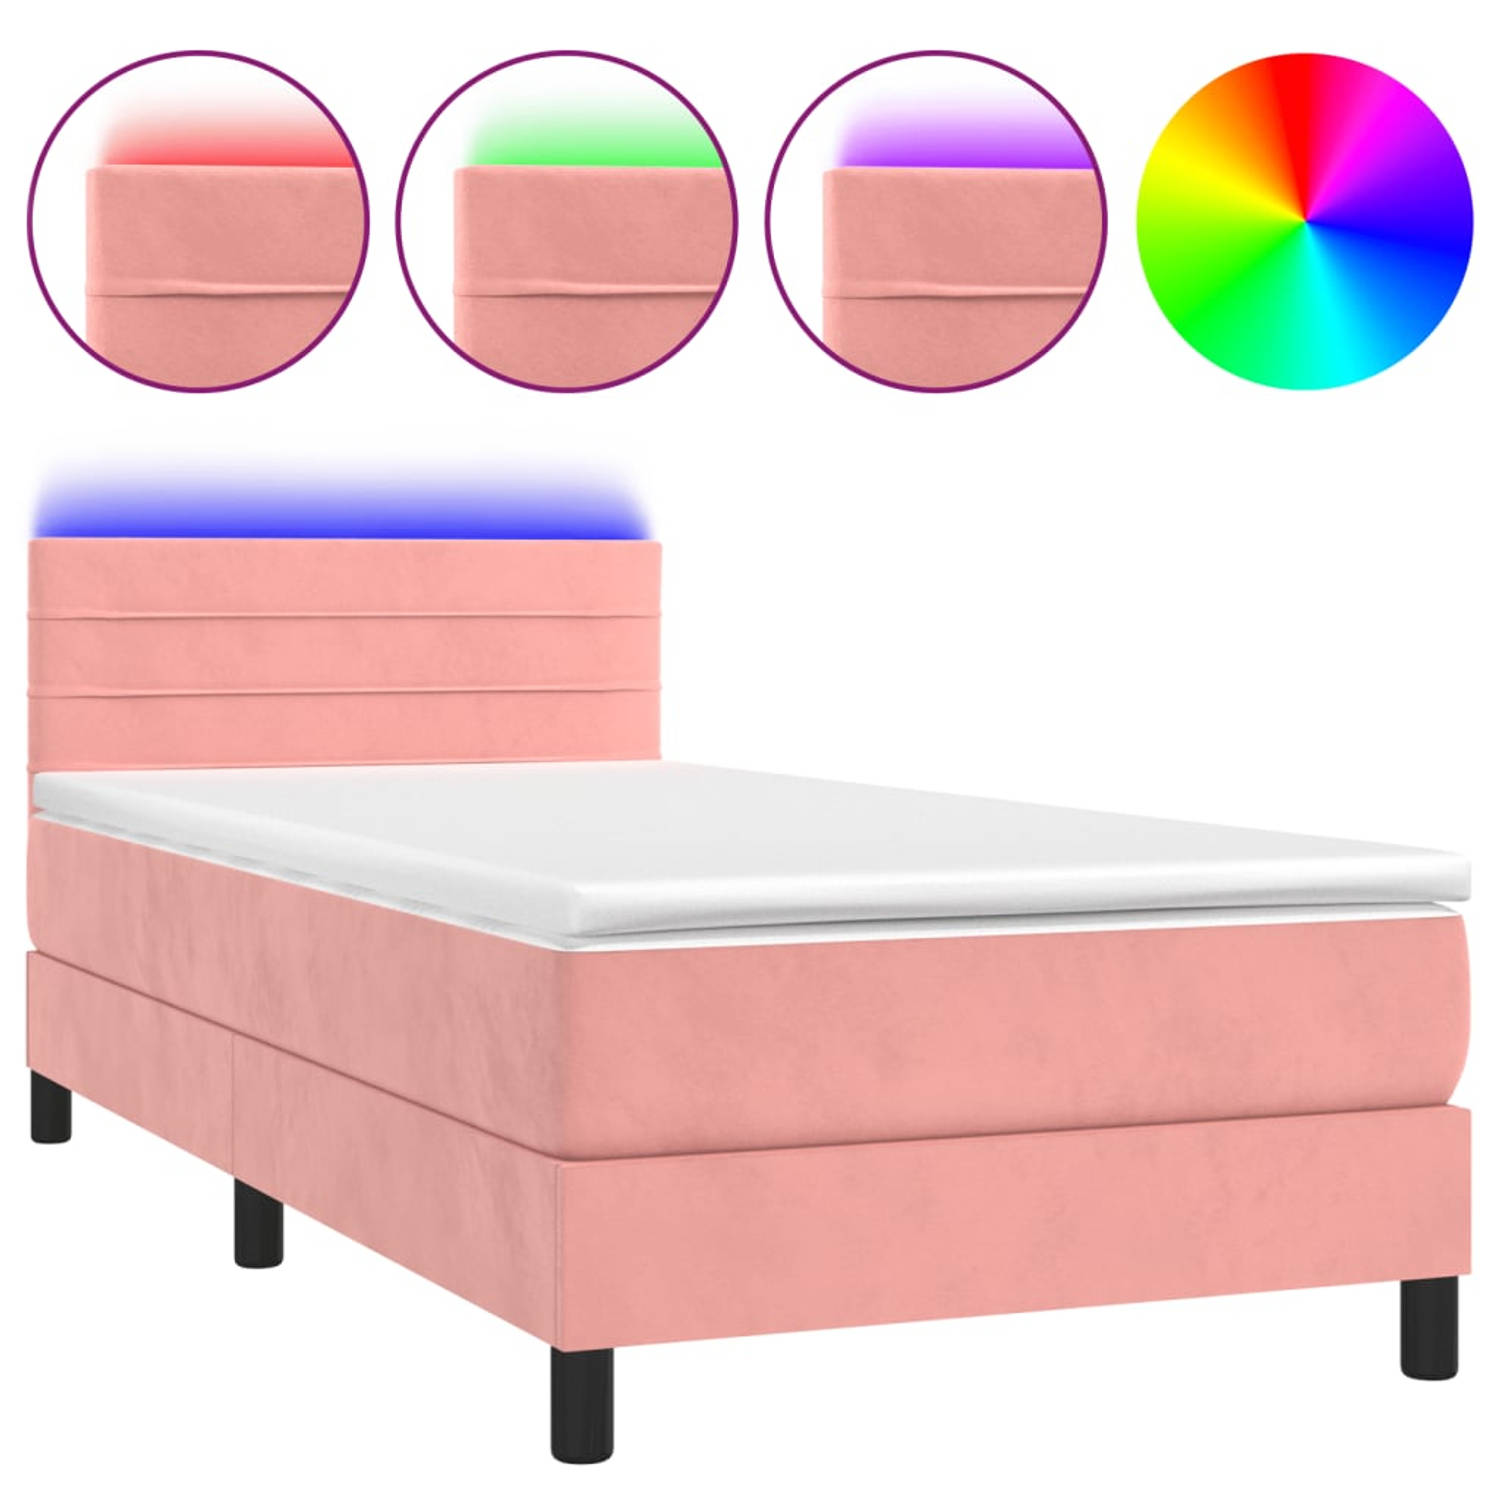 The Living Store Bed Roze fluweel 203x90x78/88cm - Pocketvering - LED-verlichting